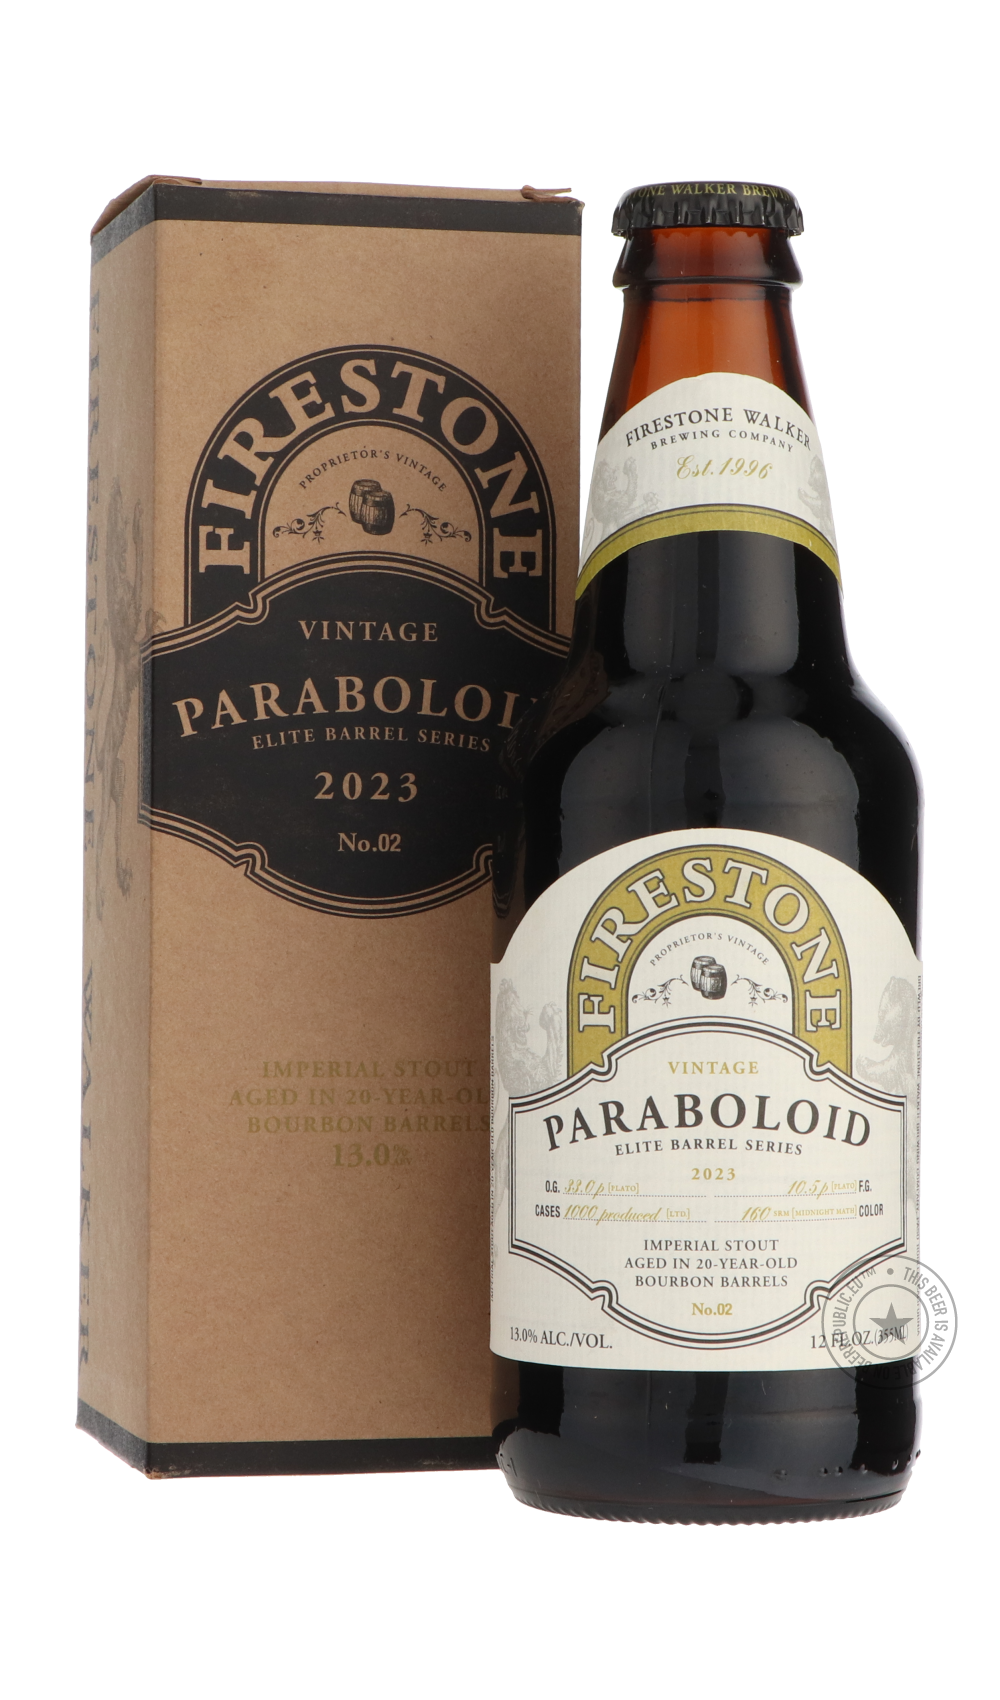 -Firestone Walker- Paraboloid-Stout & Porter- Only @ Beer Republic - The best online beer store for American & Canadian craft beer - Buy beer online from the USA and Canada - Bier online kopen - Amerikaans bier kopen - Craft beer store - Craft beer kopen - Amerikanisch bier kaufen - Bier online kaufen - Acheter biere online - IPA - Stout - Porter - New England IPA - Hazy IPA - Imperial Stout - Barrel Aged - Barrel Aged Imperial Stout - Brown - Dark beer - Blond - Blonde - Pilsner - Lager - Wheat - Weizen - 